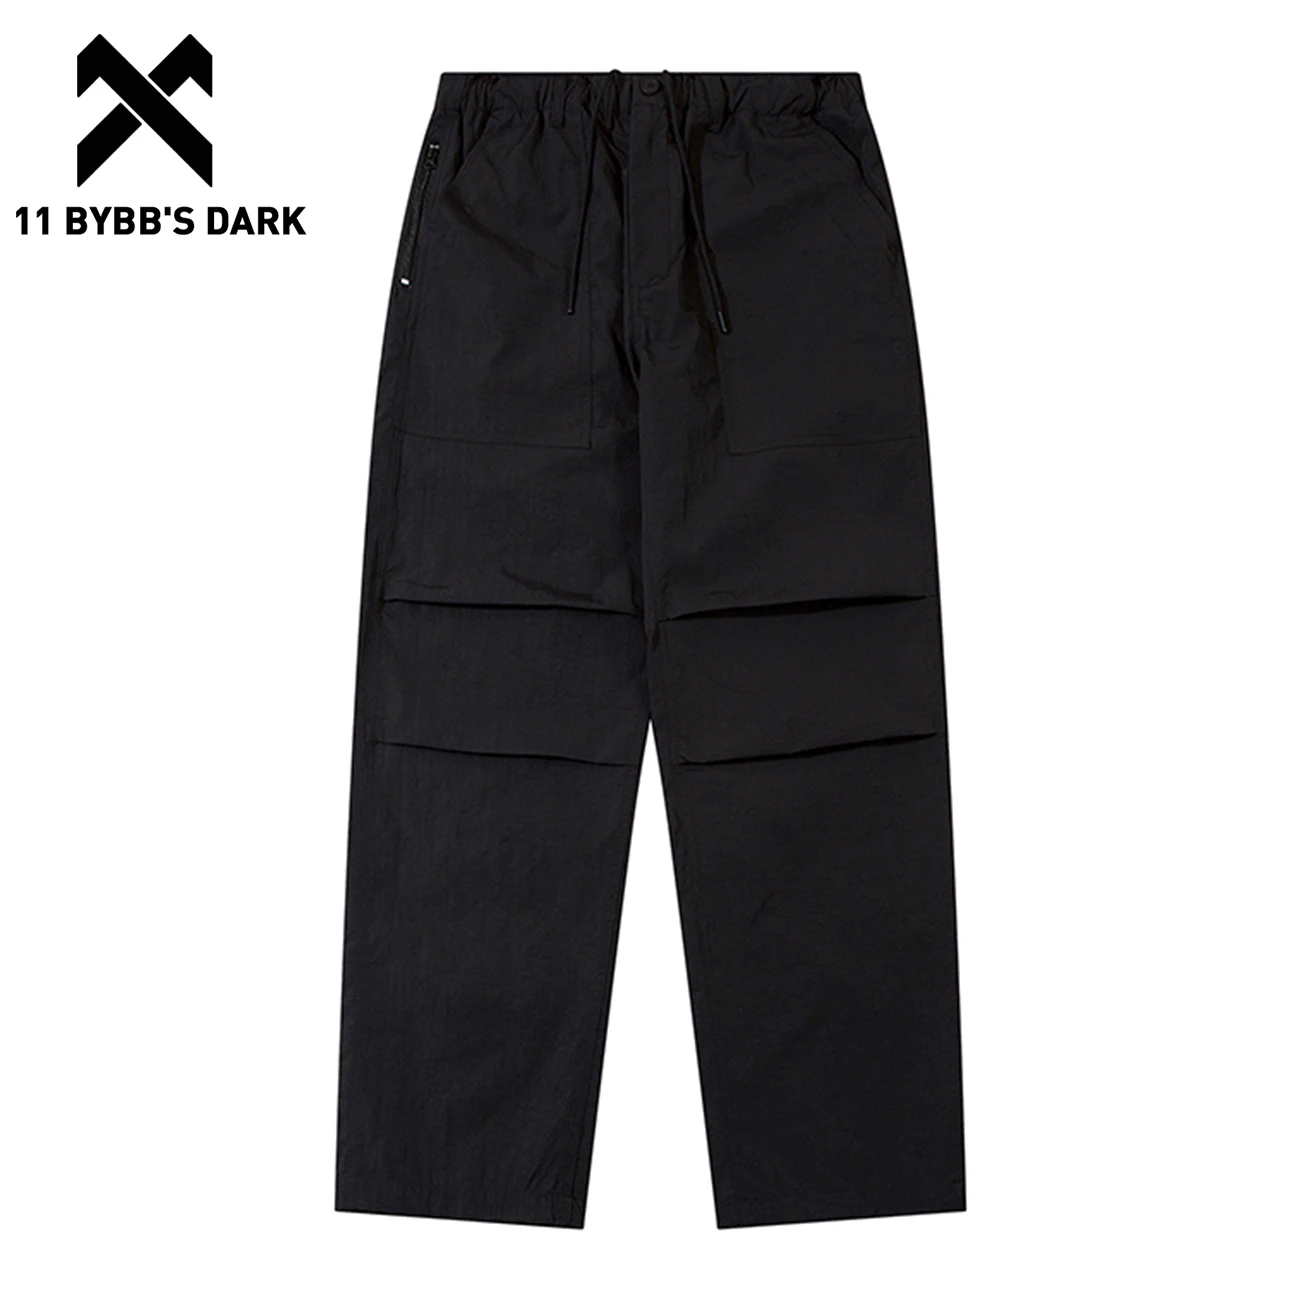 11 BYBB'S DARK Drawstring Casual Joggers 2023 New Solid Color Sweatpants Spring Autumn Outdoor Ride Pants Men Women Simple Pants